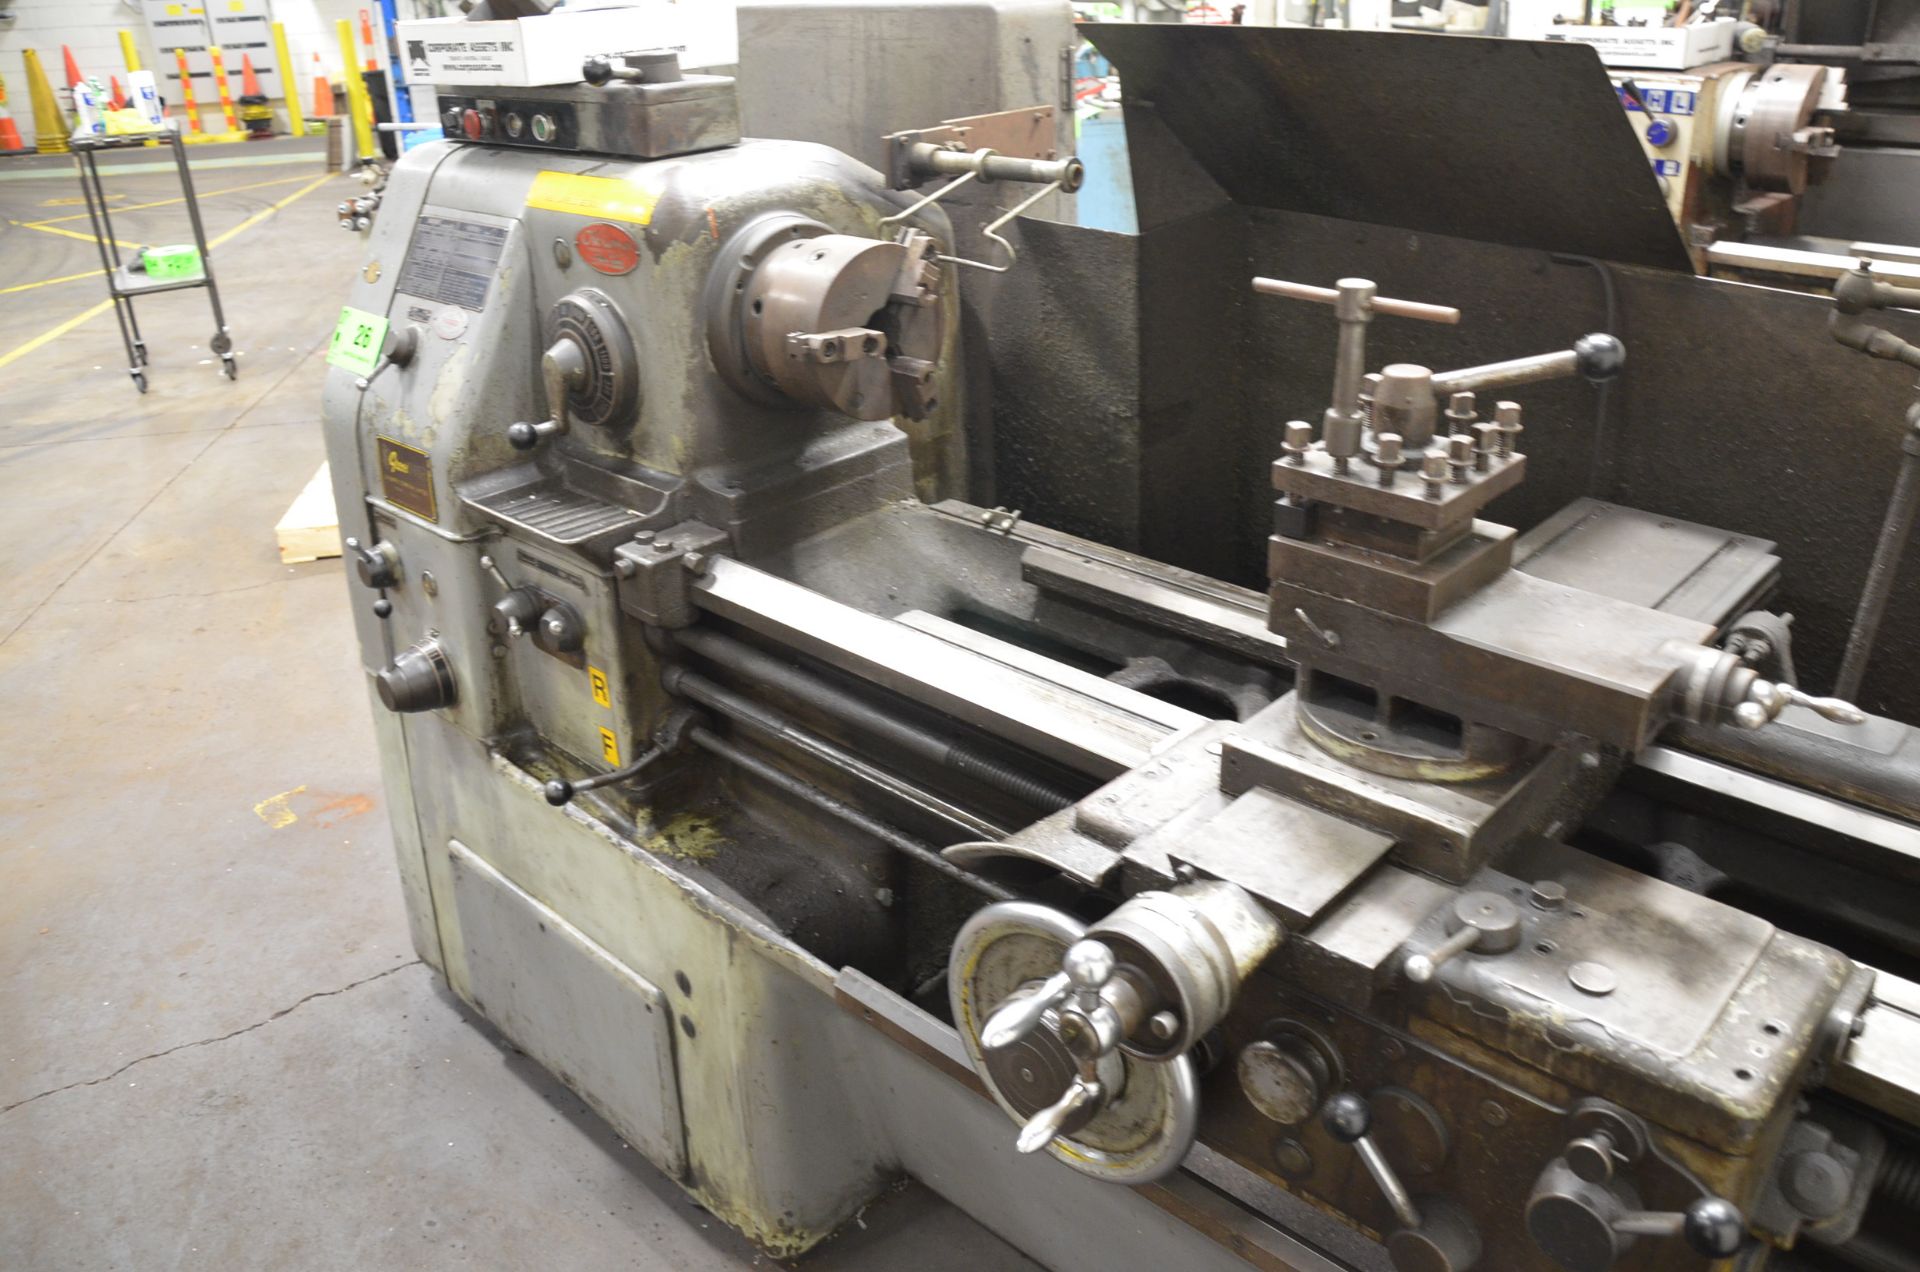 OKUMA LS ENGINE LATHE WITH 24" SWING, 60" BETWEEN CENTERS, 1.5" SPINDLE BORE, 8" 3-JAW CHUCK, SPEEDS - Image 2 of 8